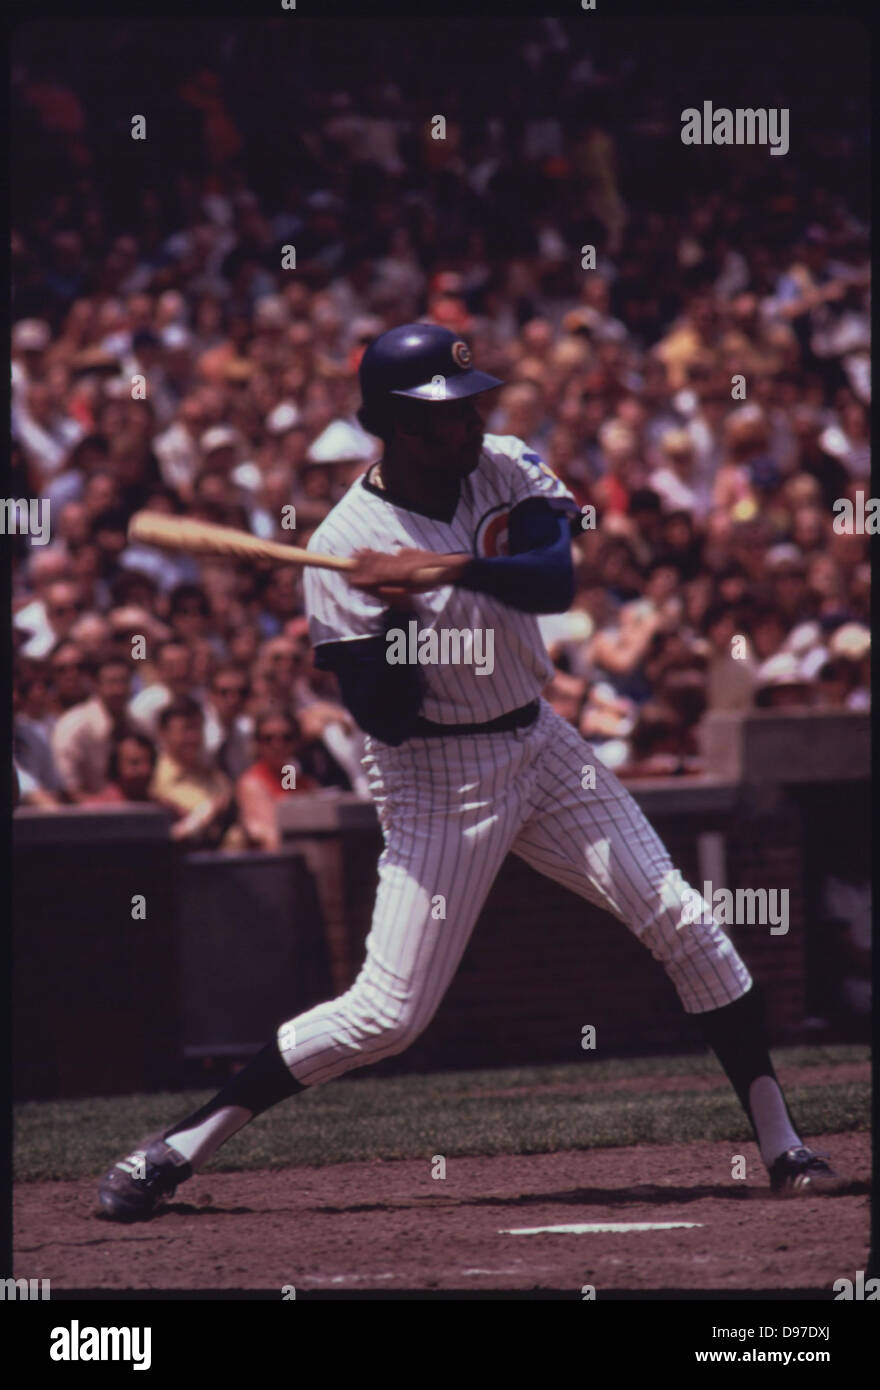 A Chicago Cubs Batter Awaits A Pitch From A Visiting Oakland A's Player In A Game At Wrigley Field, 07/1973 Stock Photo